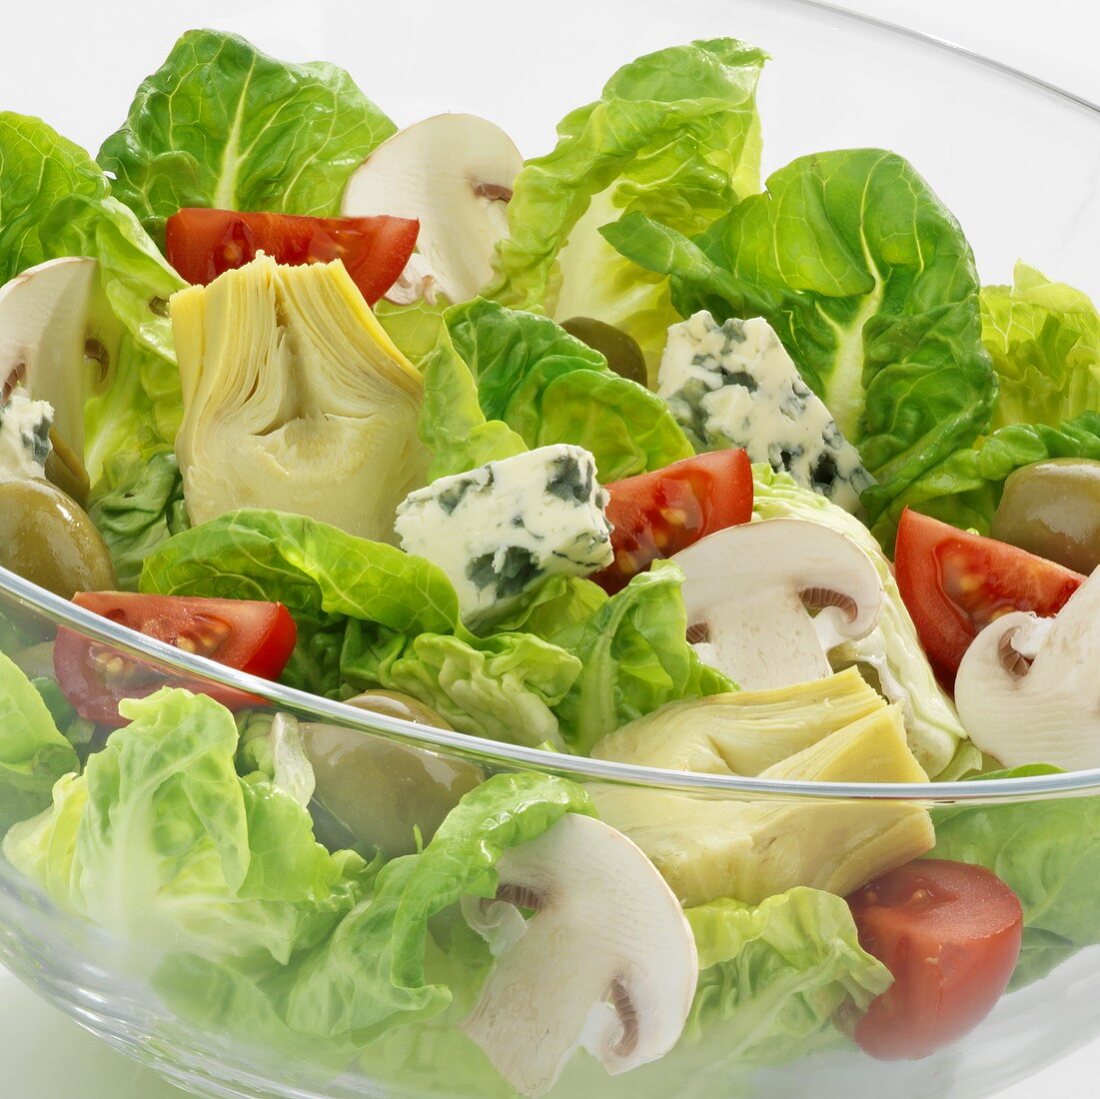 Lettuce with vegetables, mushrooms and blue cheese